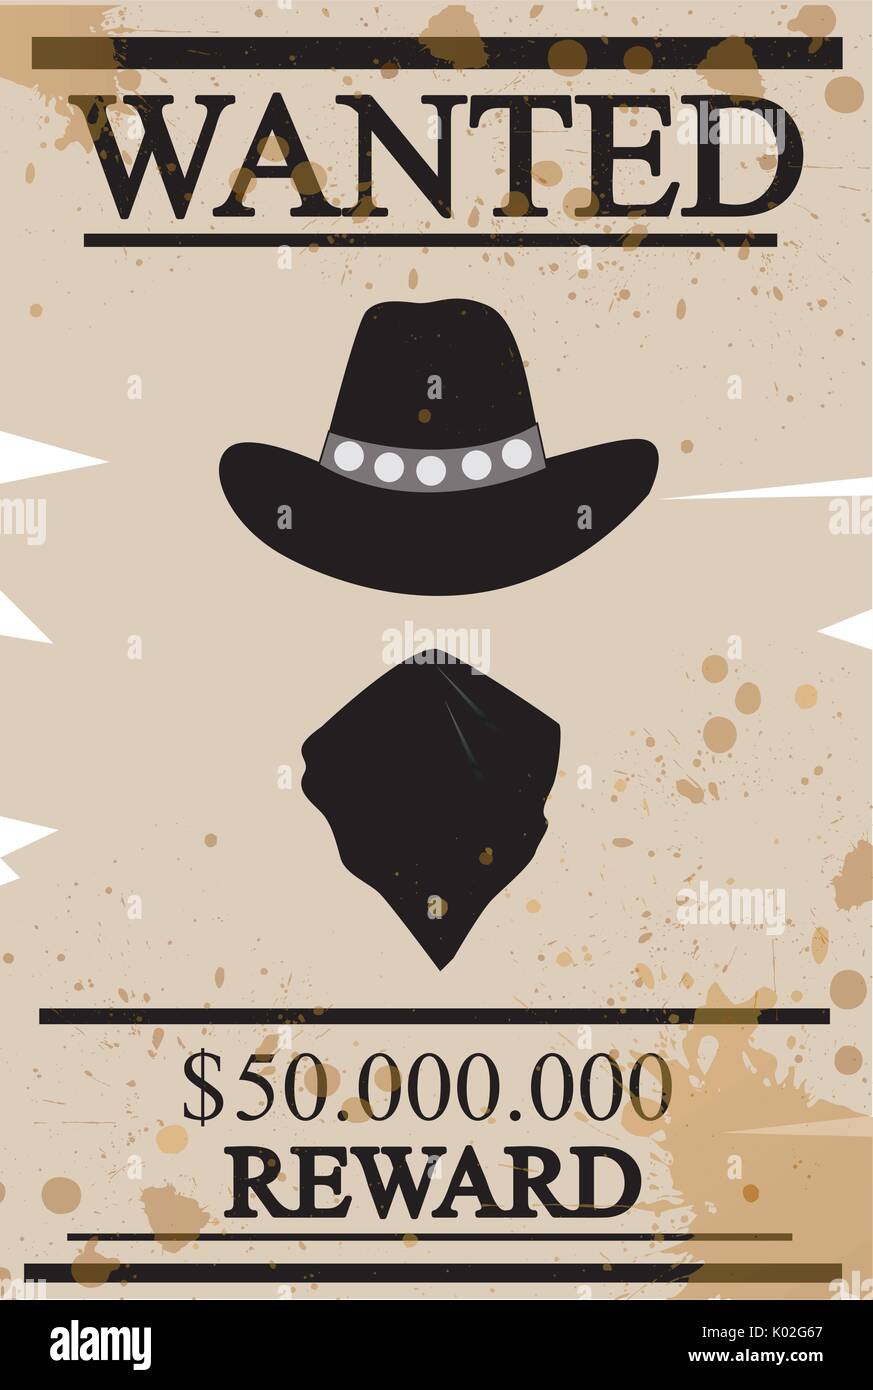 Vintage western wanted poster Stock Vector